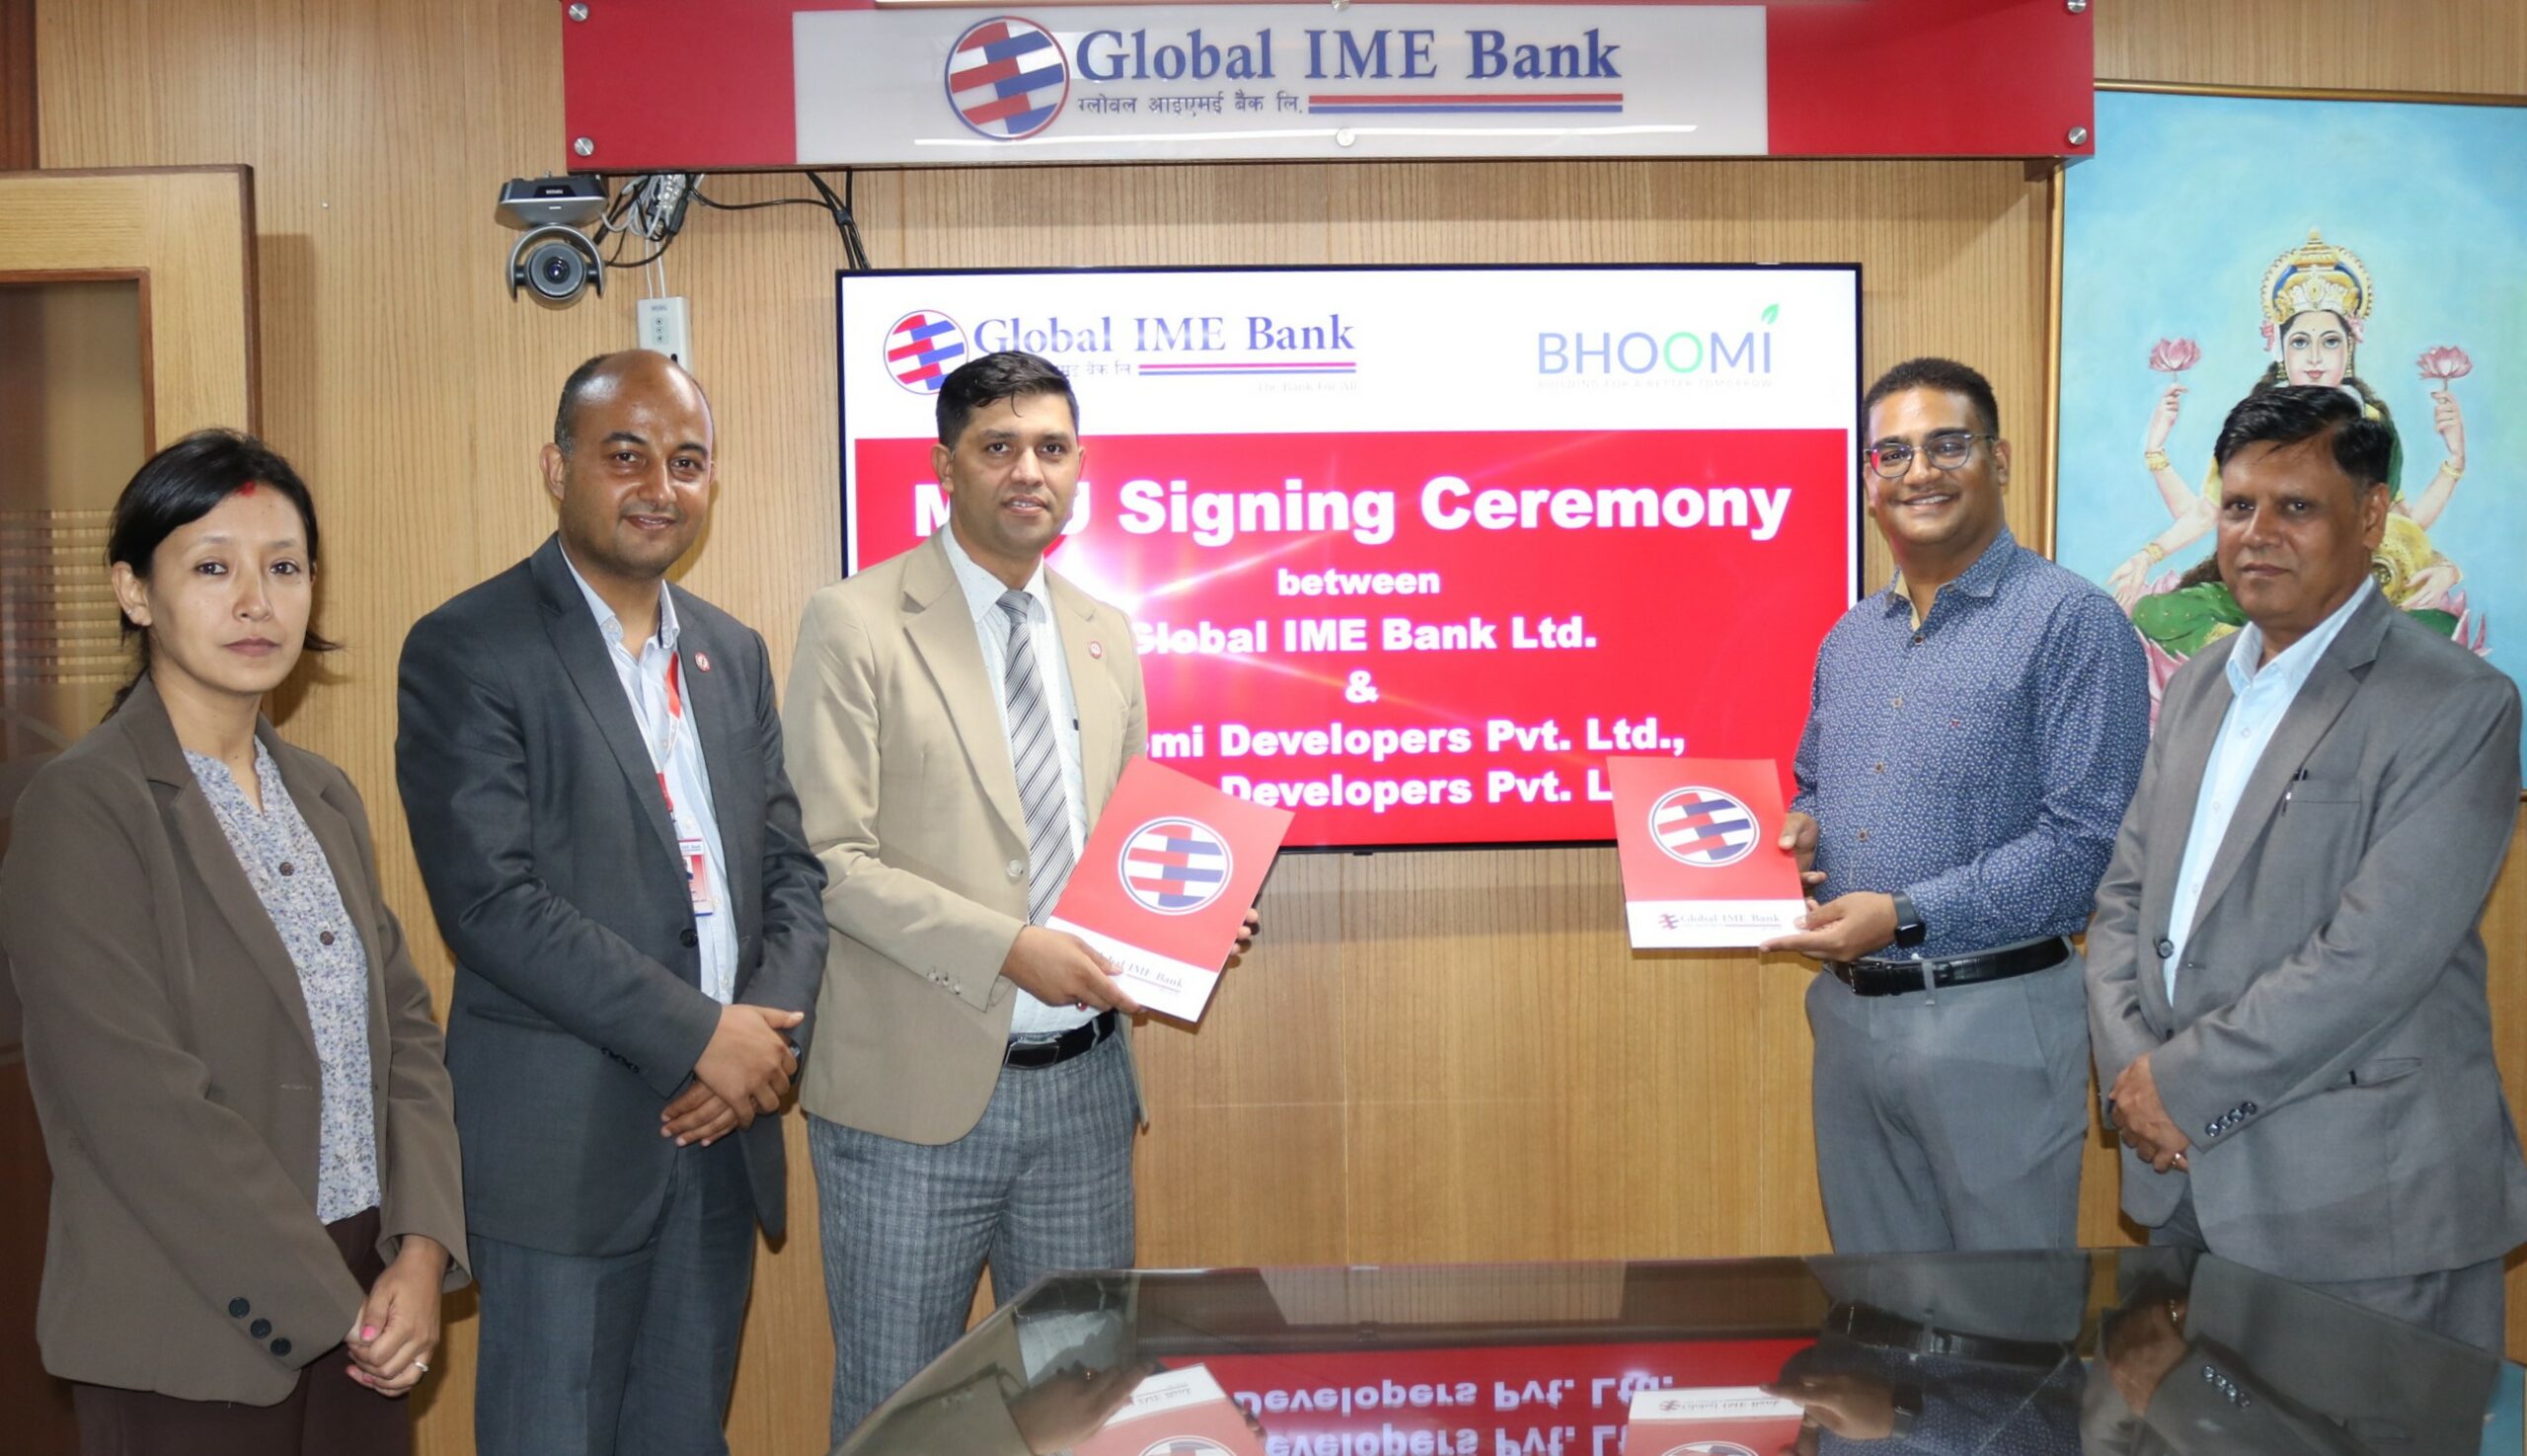 GIBL & Bhumi Developers sign agreement for green housing loans